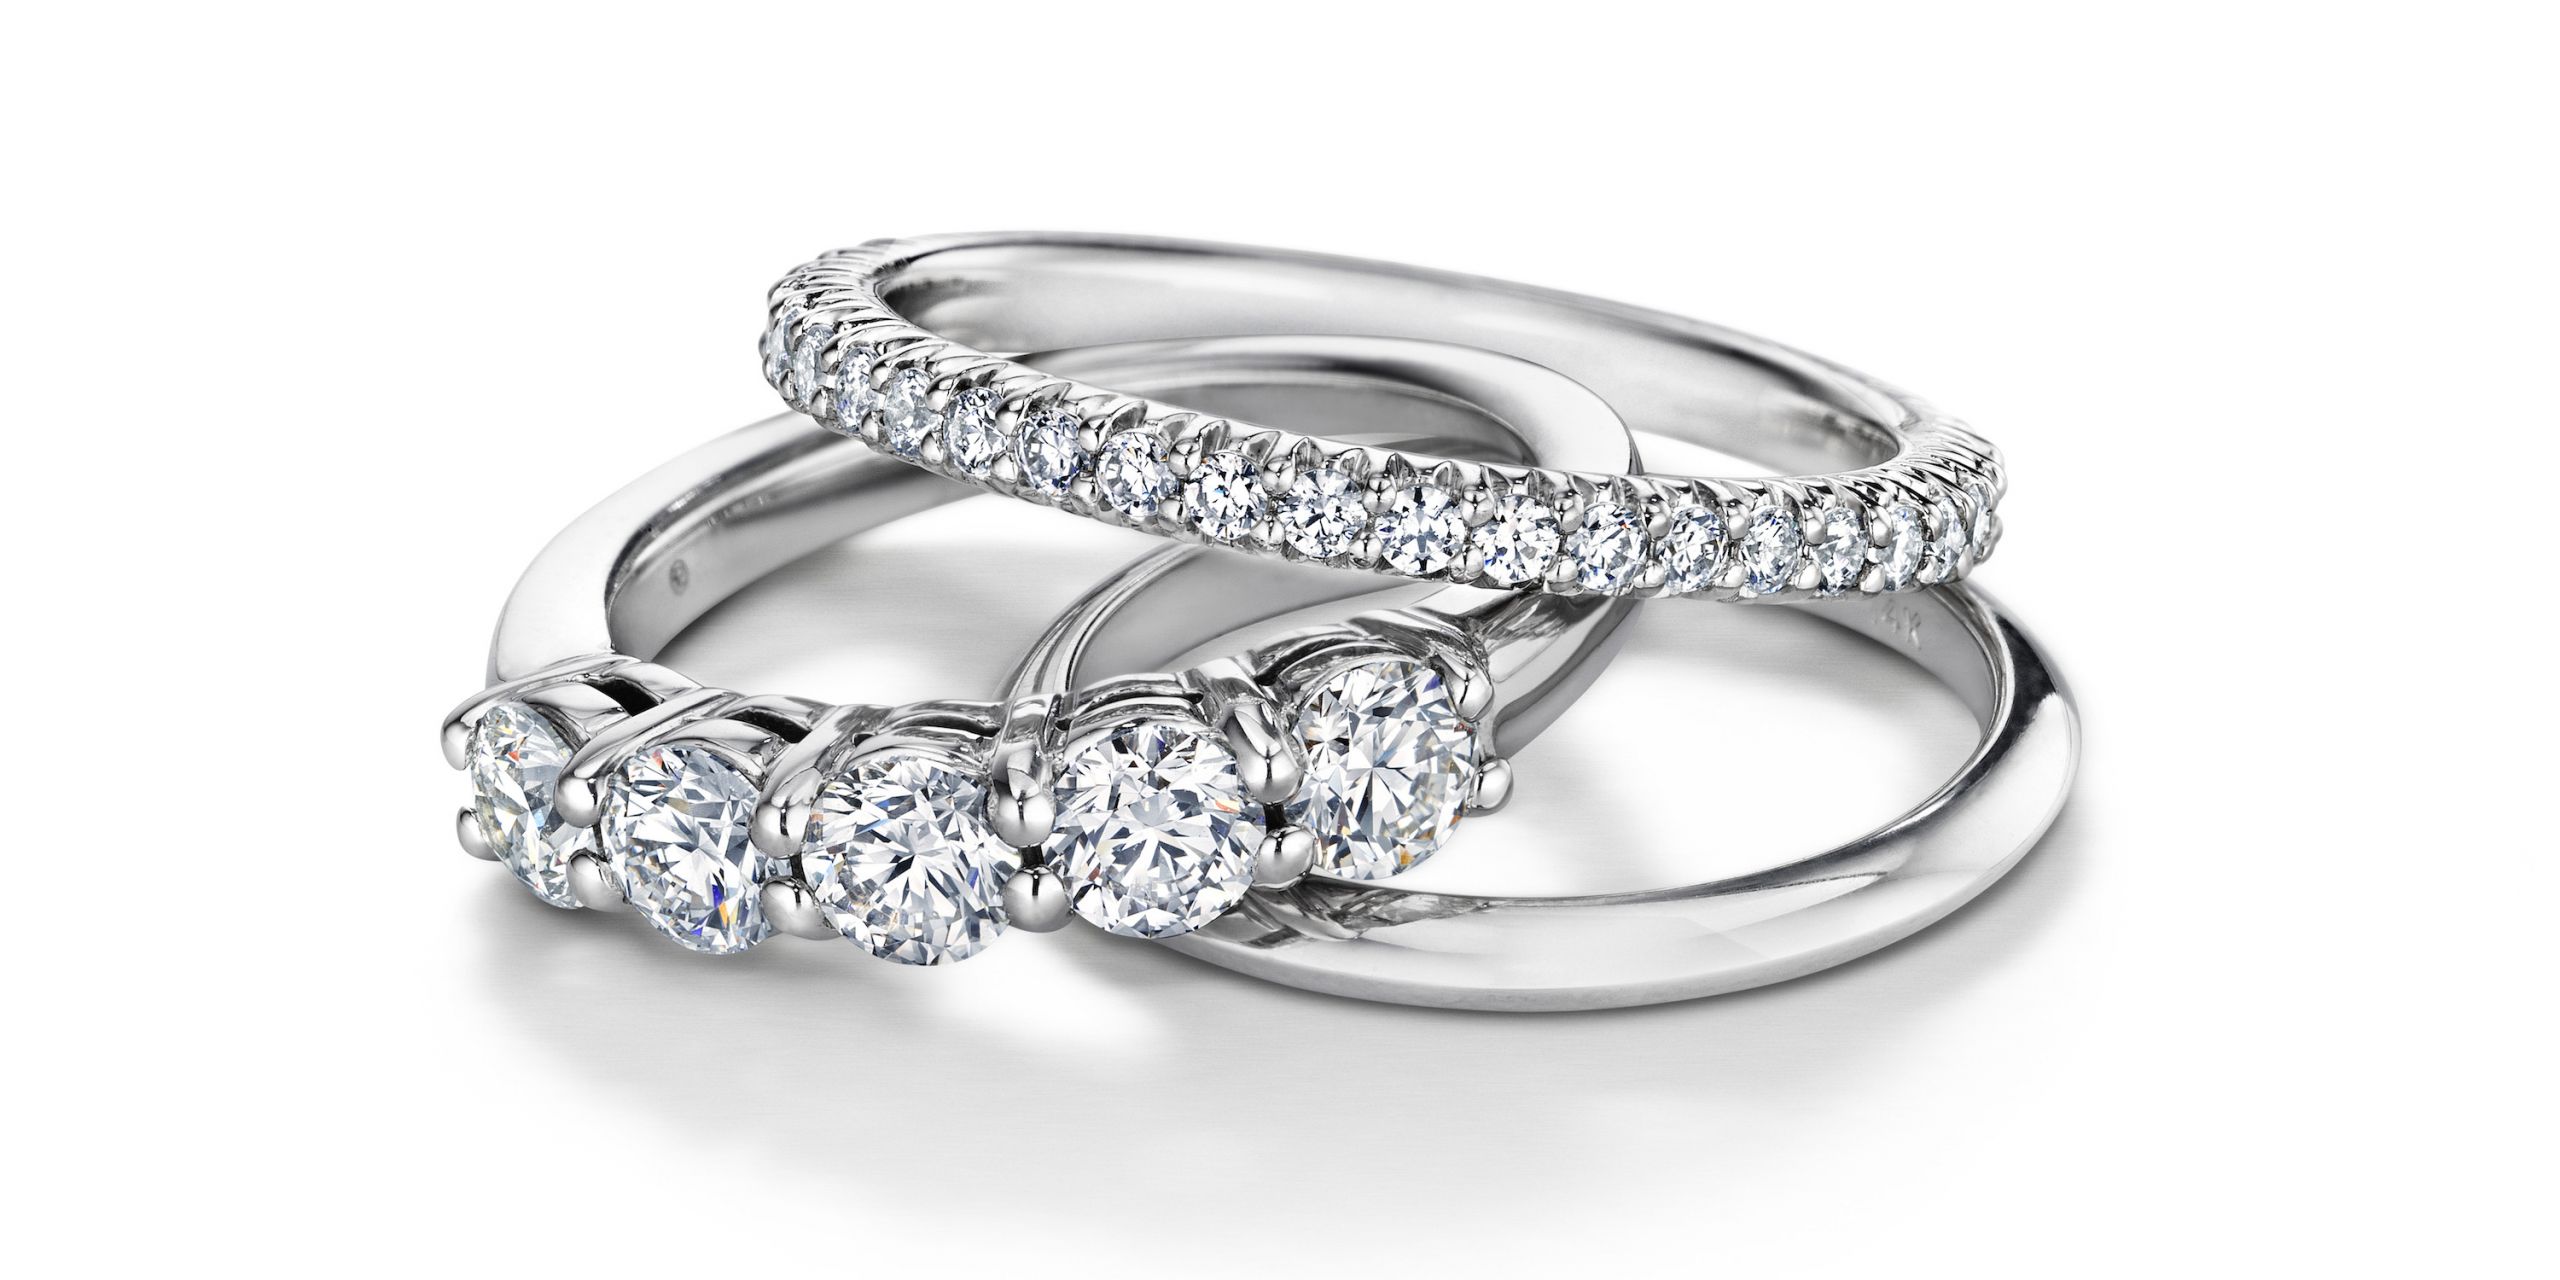 Popular Wedding Rings
 The Top 10 Most Popular Wedding Rings of 2015